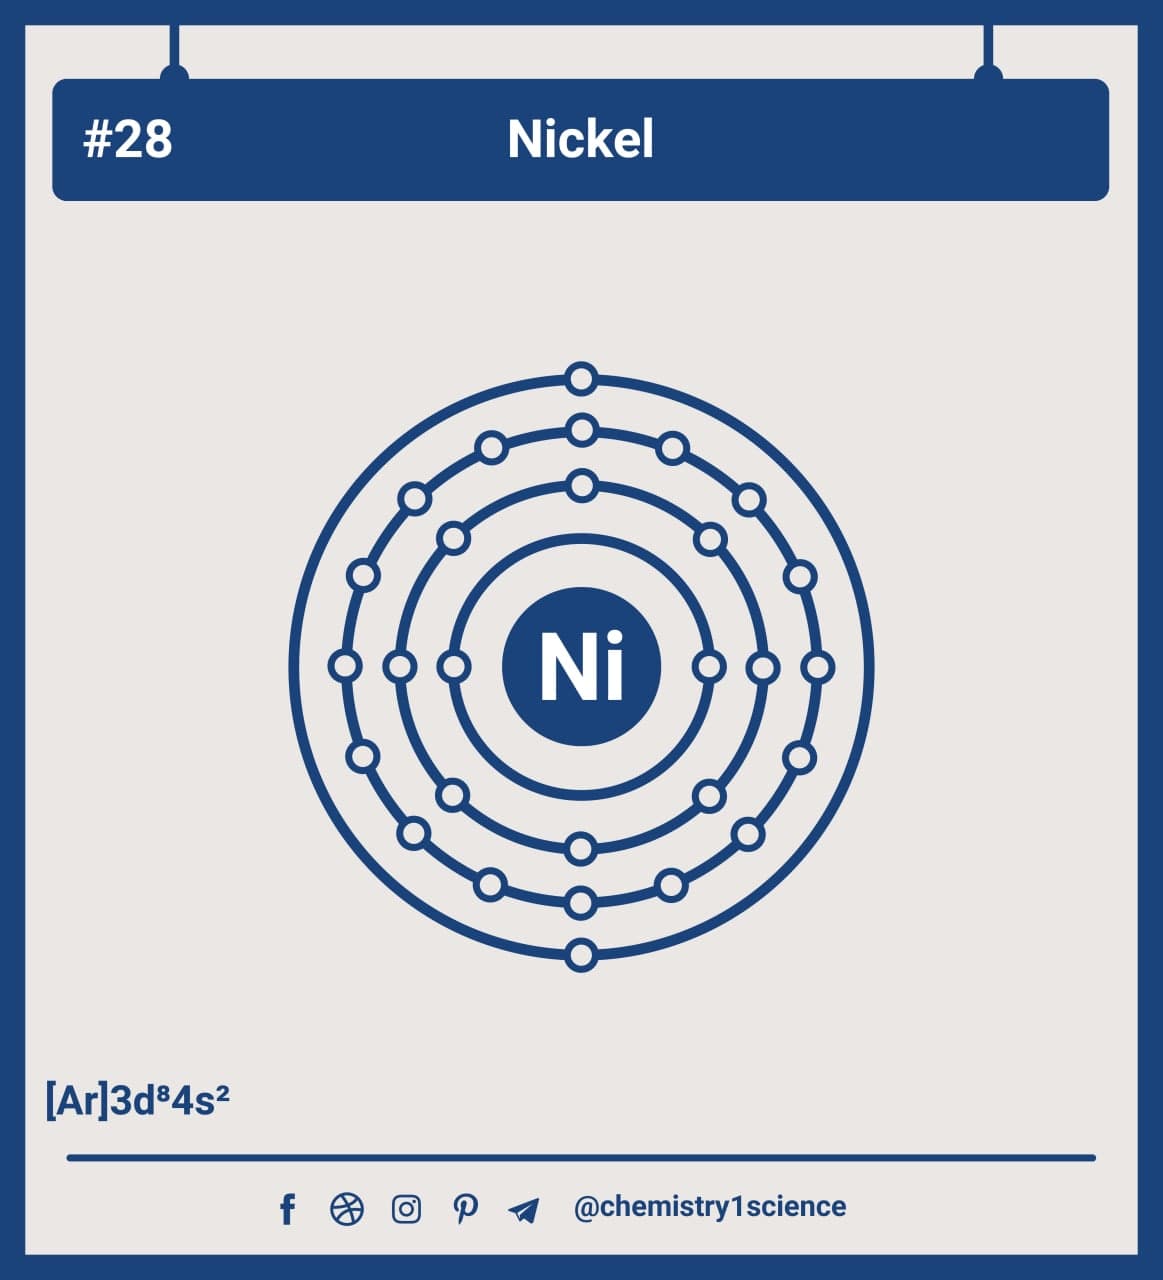 Atom Diagrams Showing Electron Shell Configurations of the Nickel